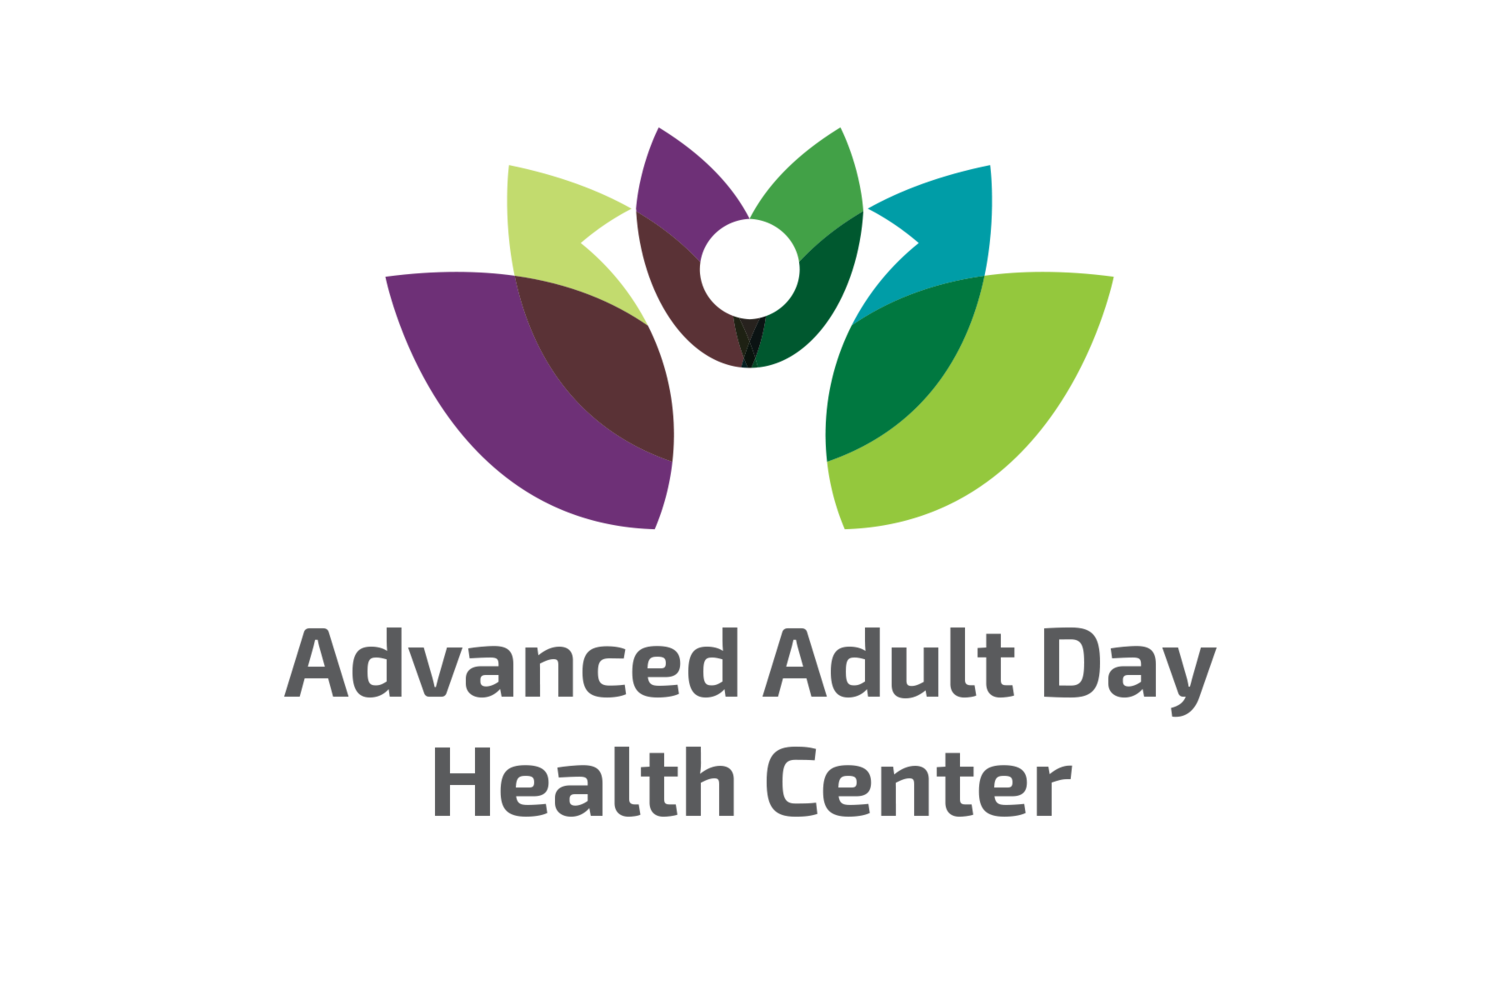 Advanced Adult Day Health Center